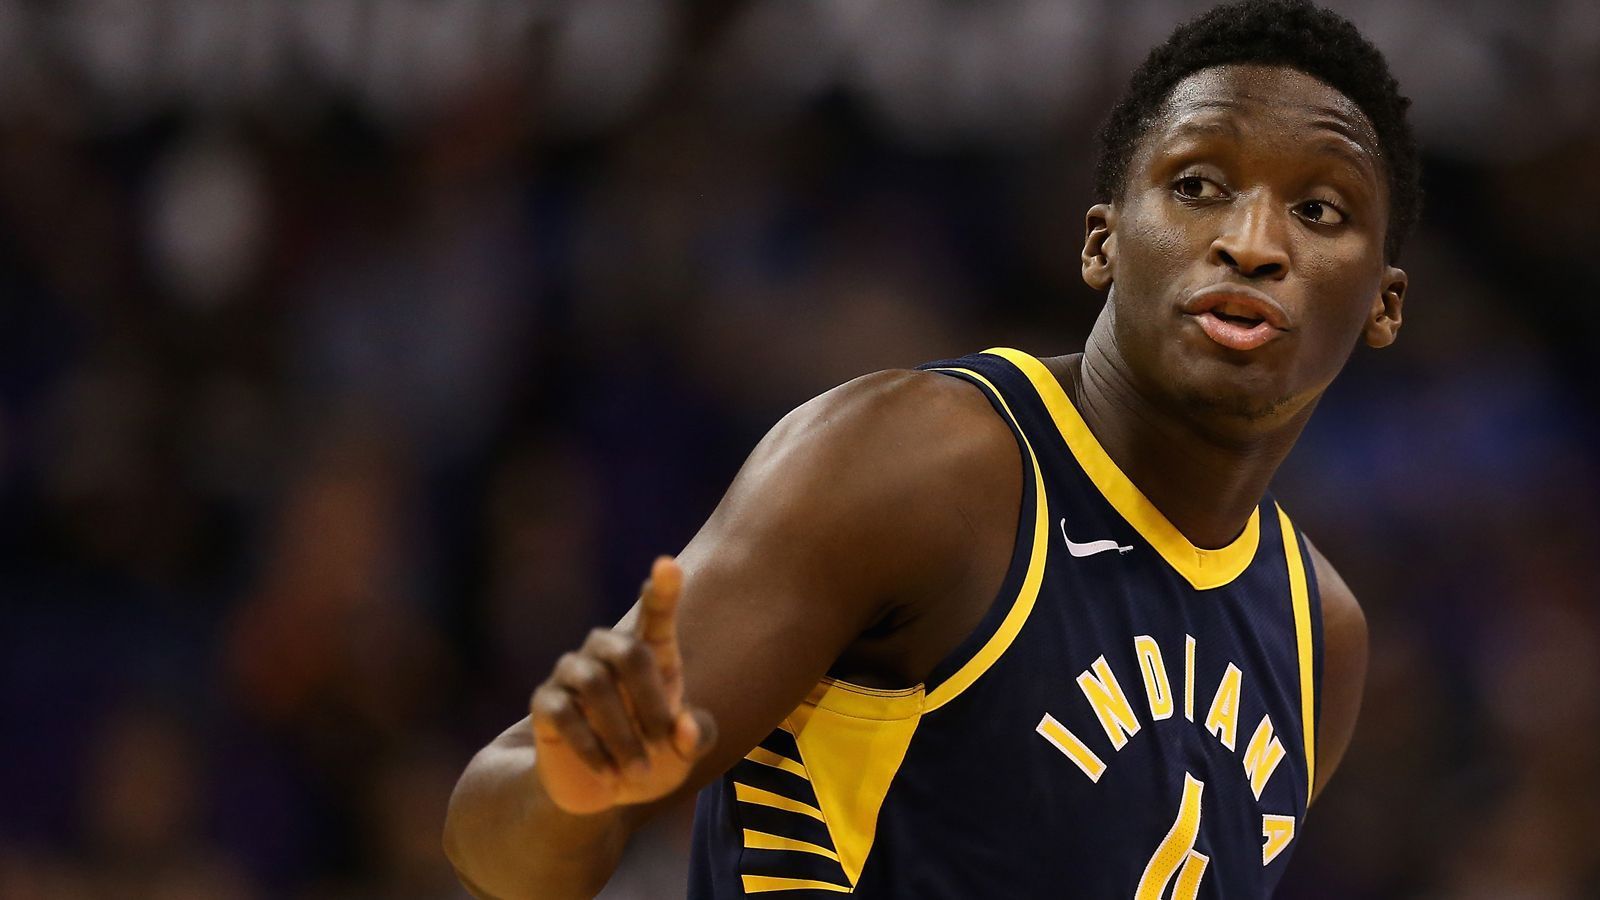 
                <strong>Victor Oladipo (Indiana Pacers)</strong><br>
                Victor Oladipo (Indiana Pacers): Most Improved Player
              